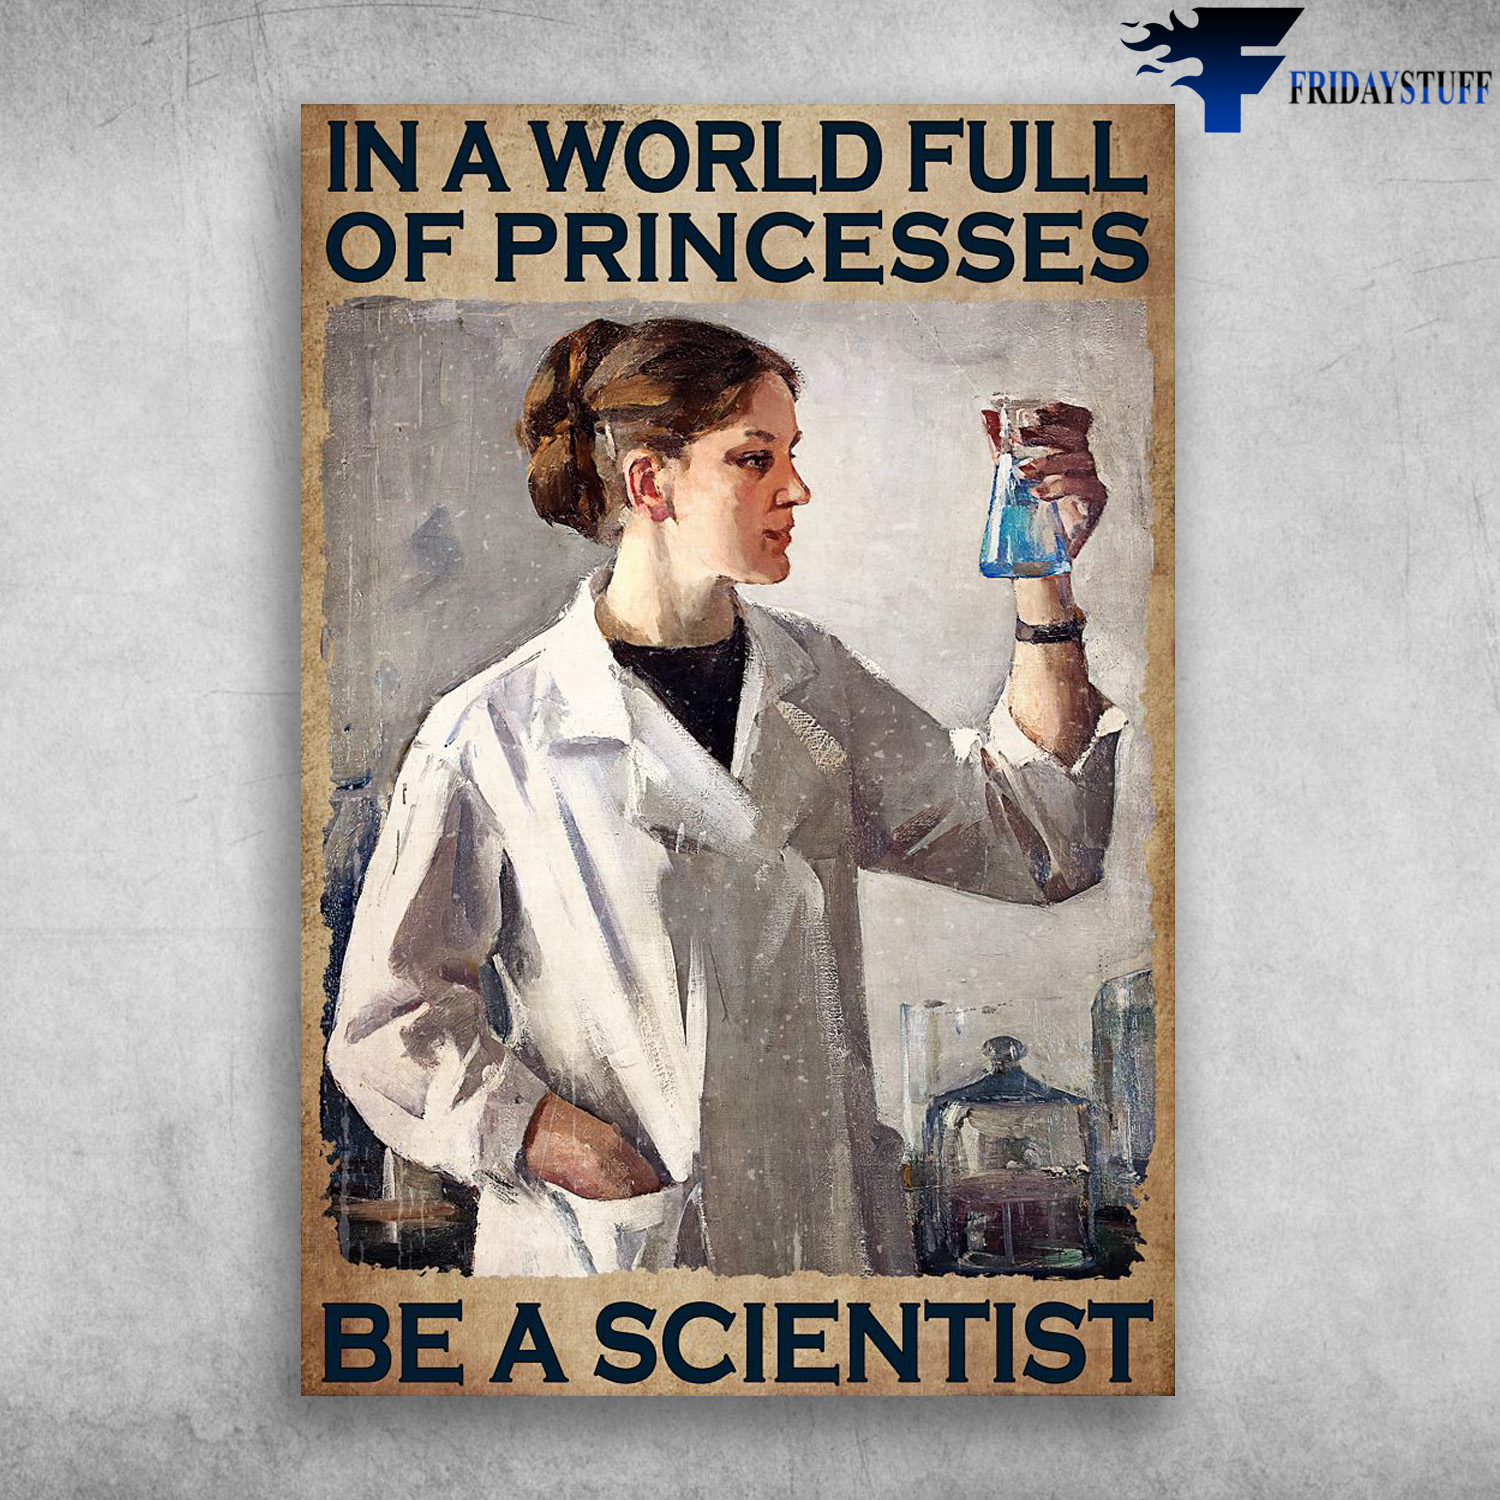 Woman Scientist - In A World Full Of Princesses, Be A Scientist